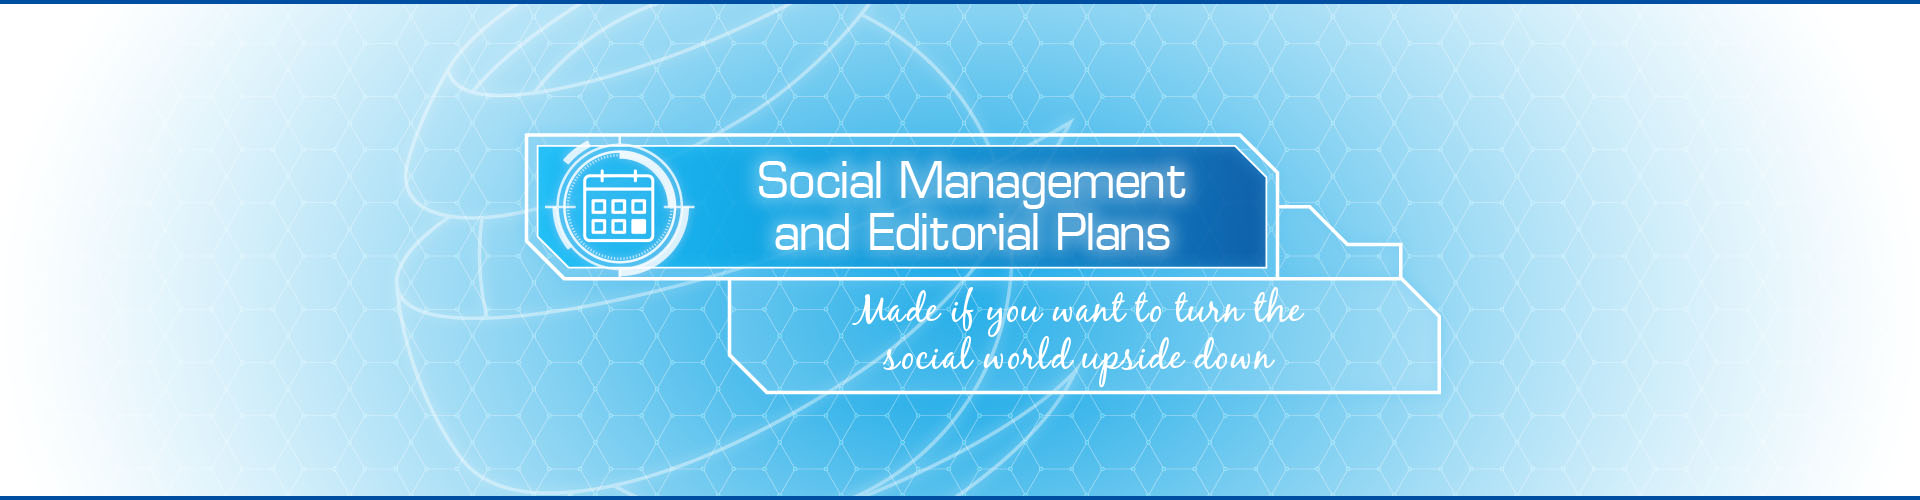 Social Management and Editorial Plans